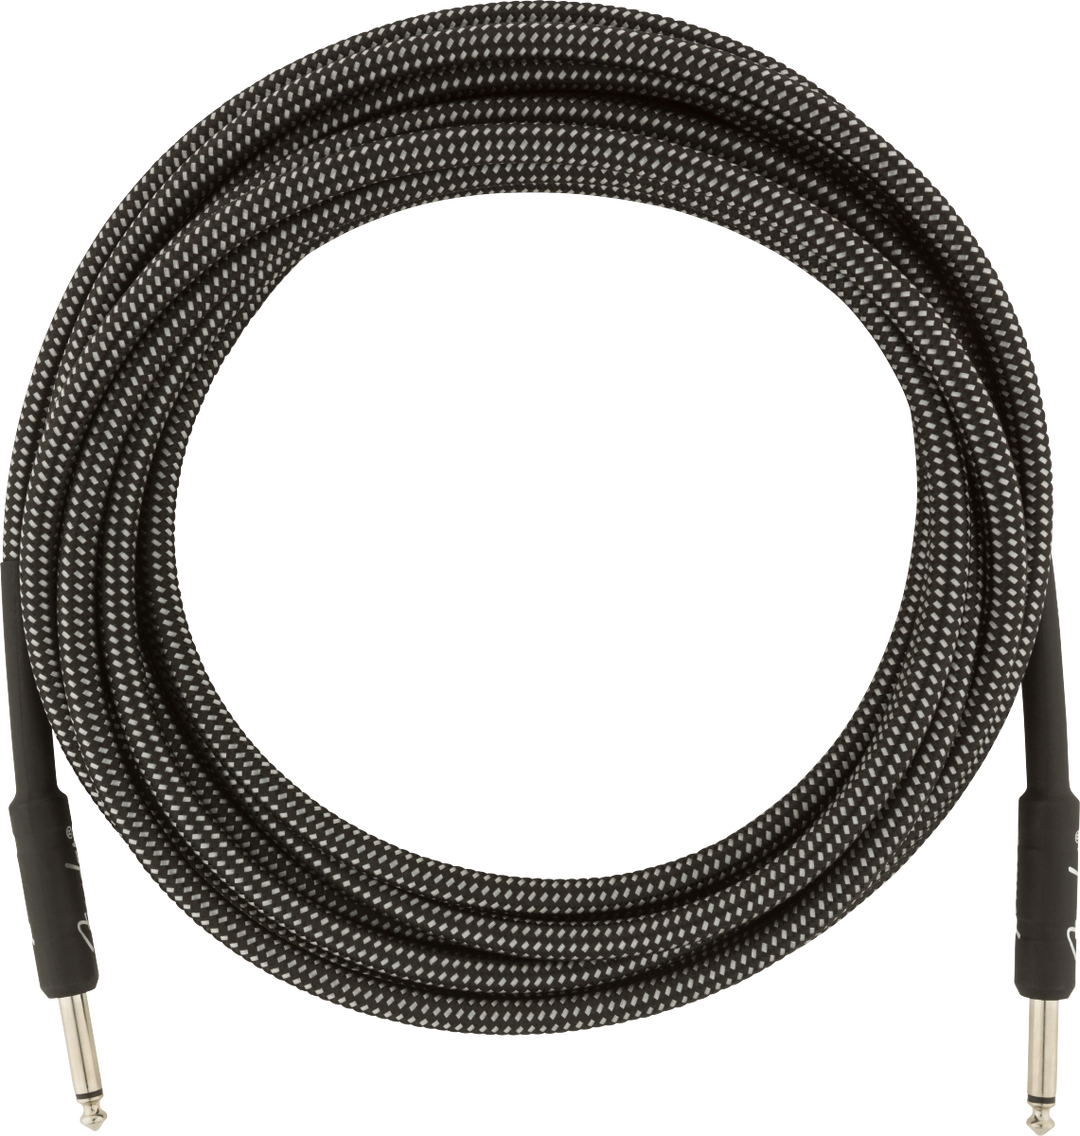 Fender Professional Instrument Cable, Grey Tweed